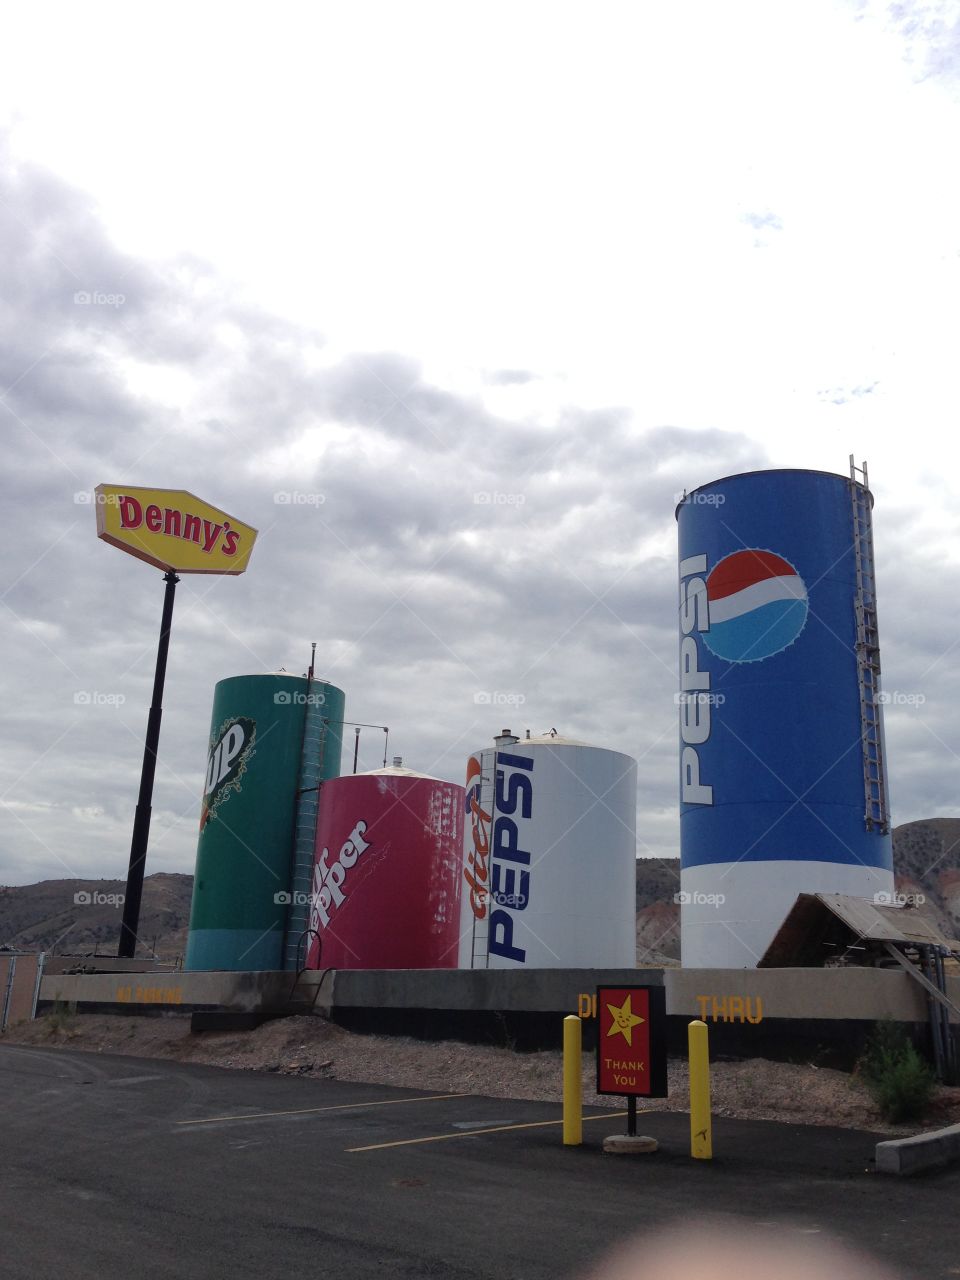 Giant Soda Cans. Water towers painted to look like soda cans in Salina, Utah